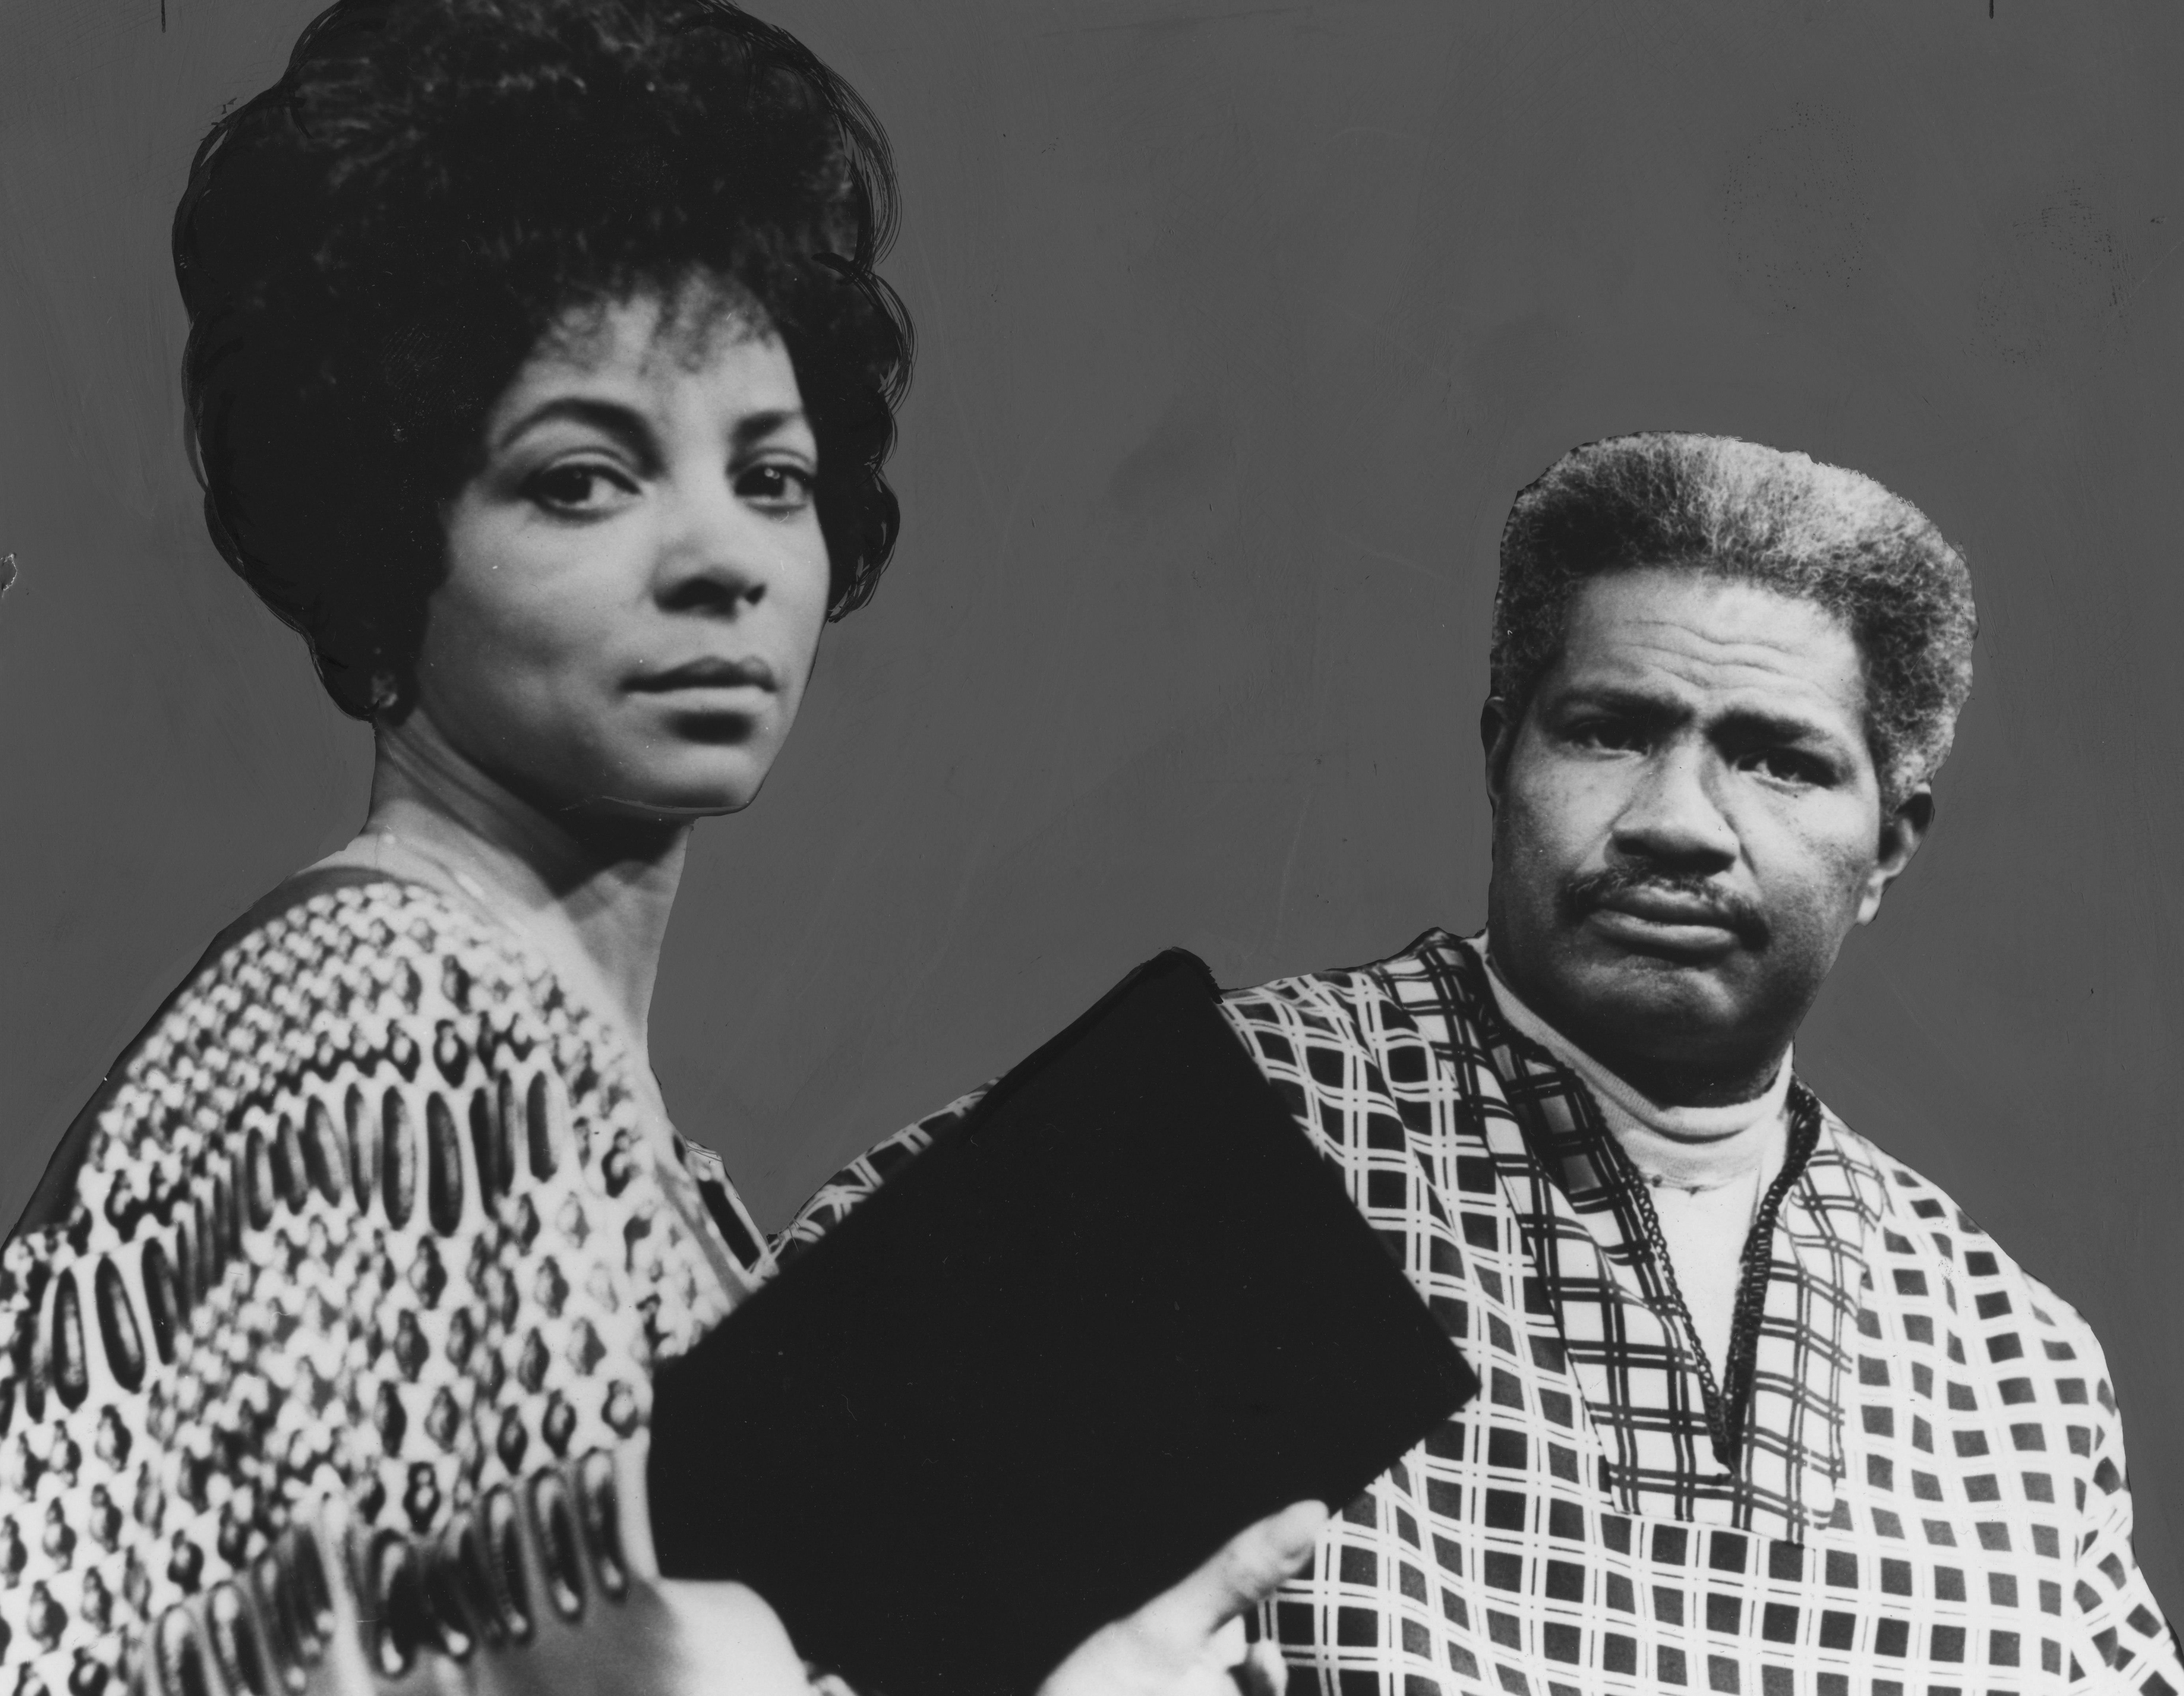 Ruby Dee and Ossie Davis at an appearance for Black History Month, Maryland, February 20, 1980.  